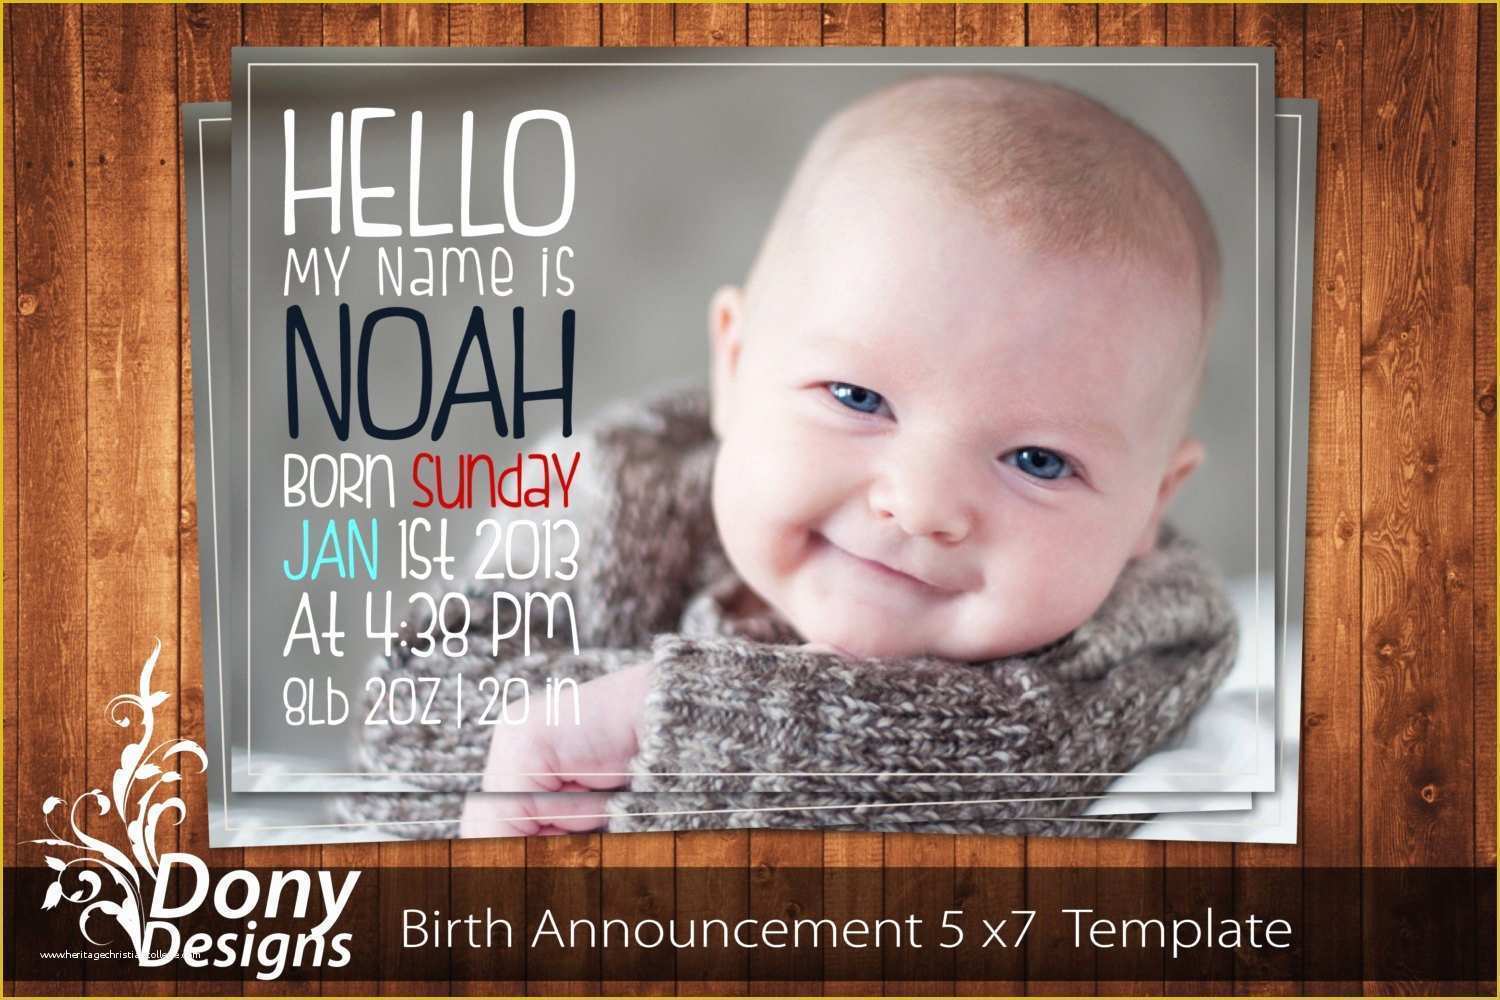 Free Birth Announcement Template Of Buy 1 Get 1 Free Birth Announcement Neutral Baby